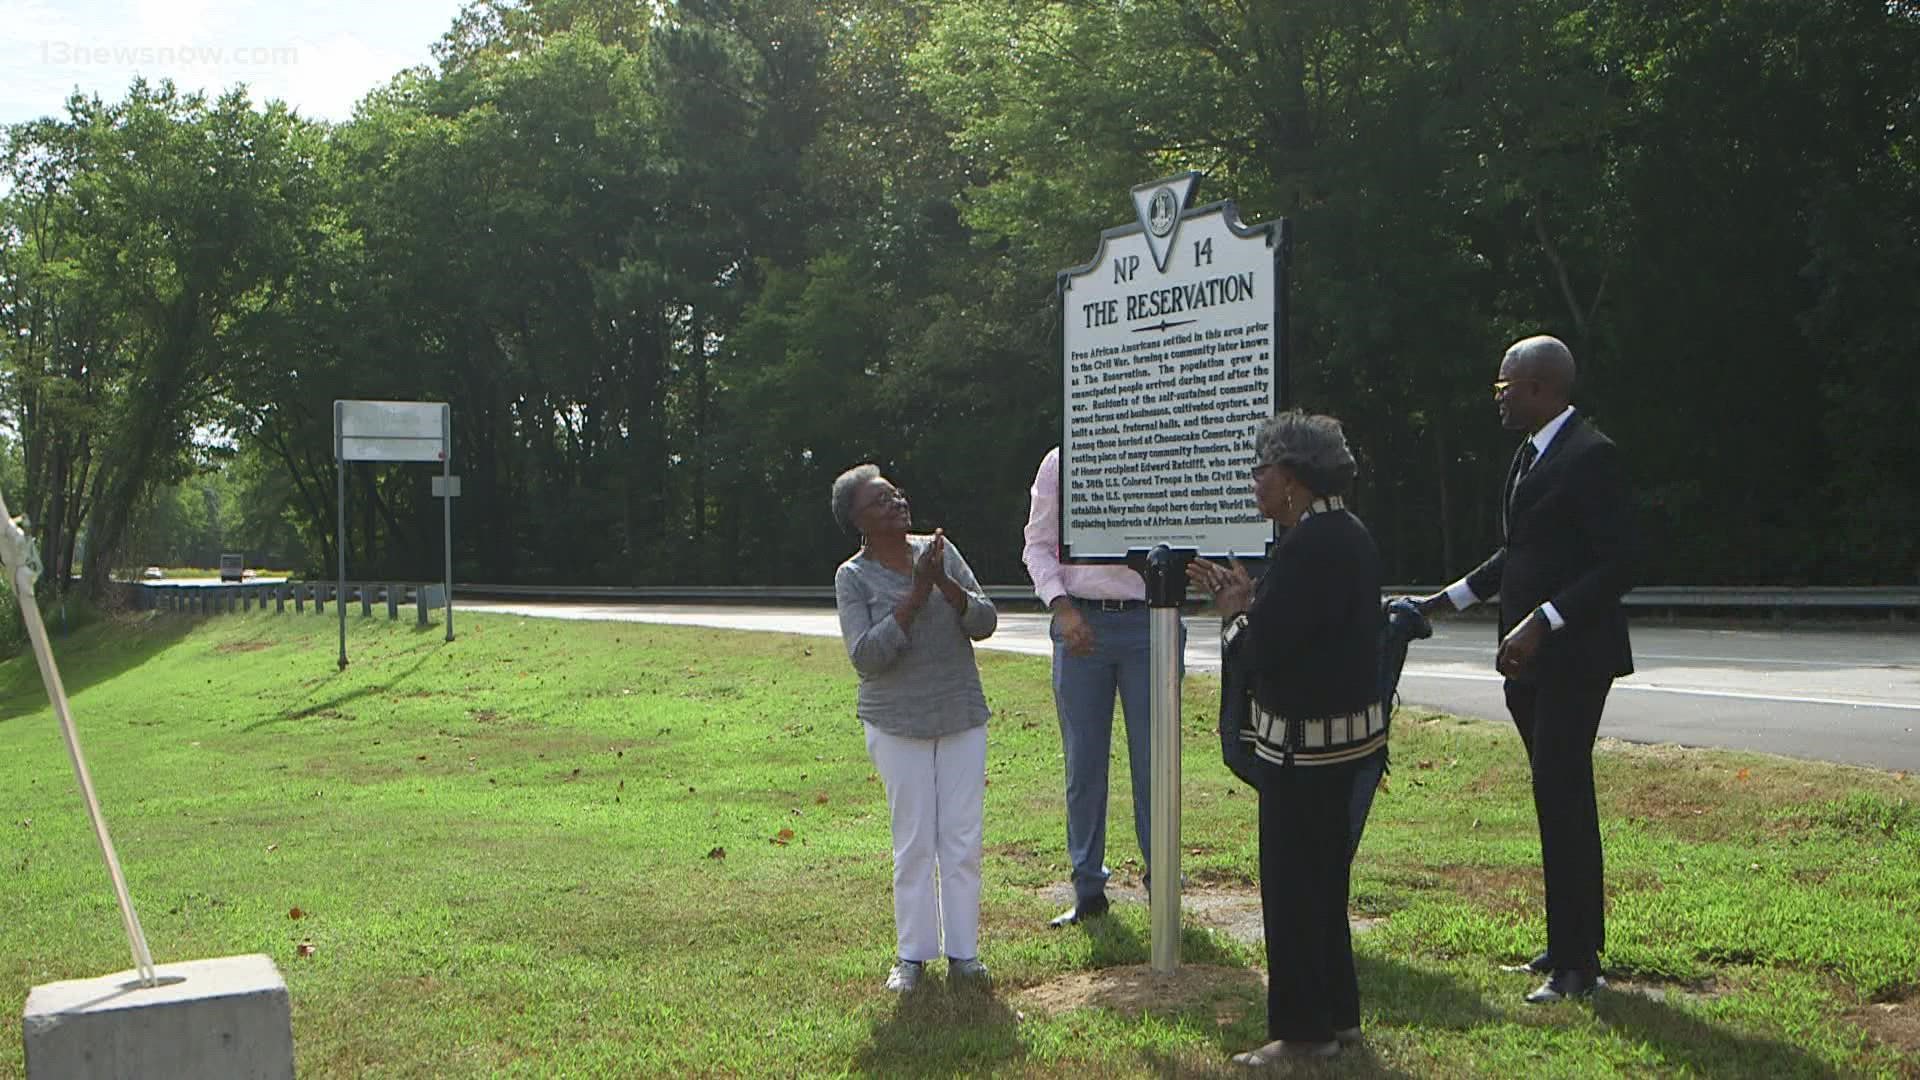 Oral history and family gatherings kept the stories of this free community alive for generations. Now, it's forever cemented in Hampton Roads.